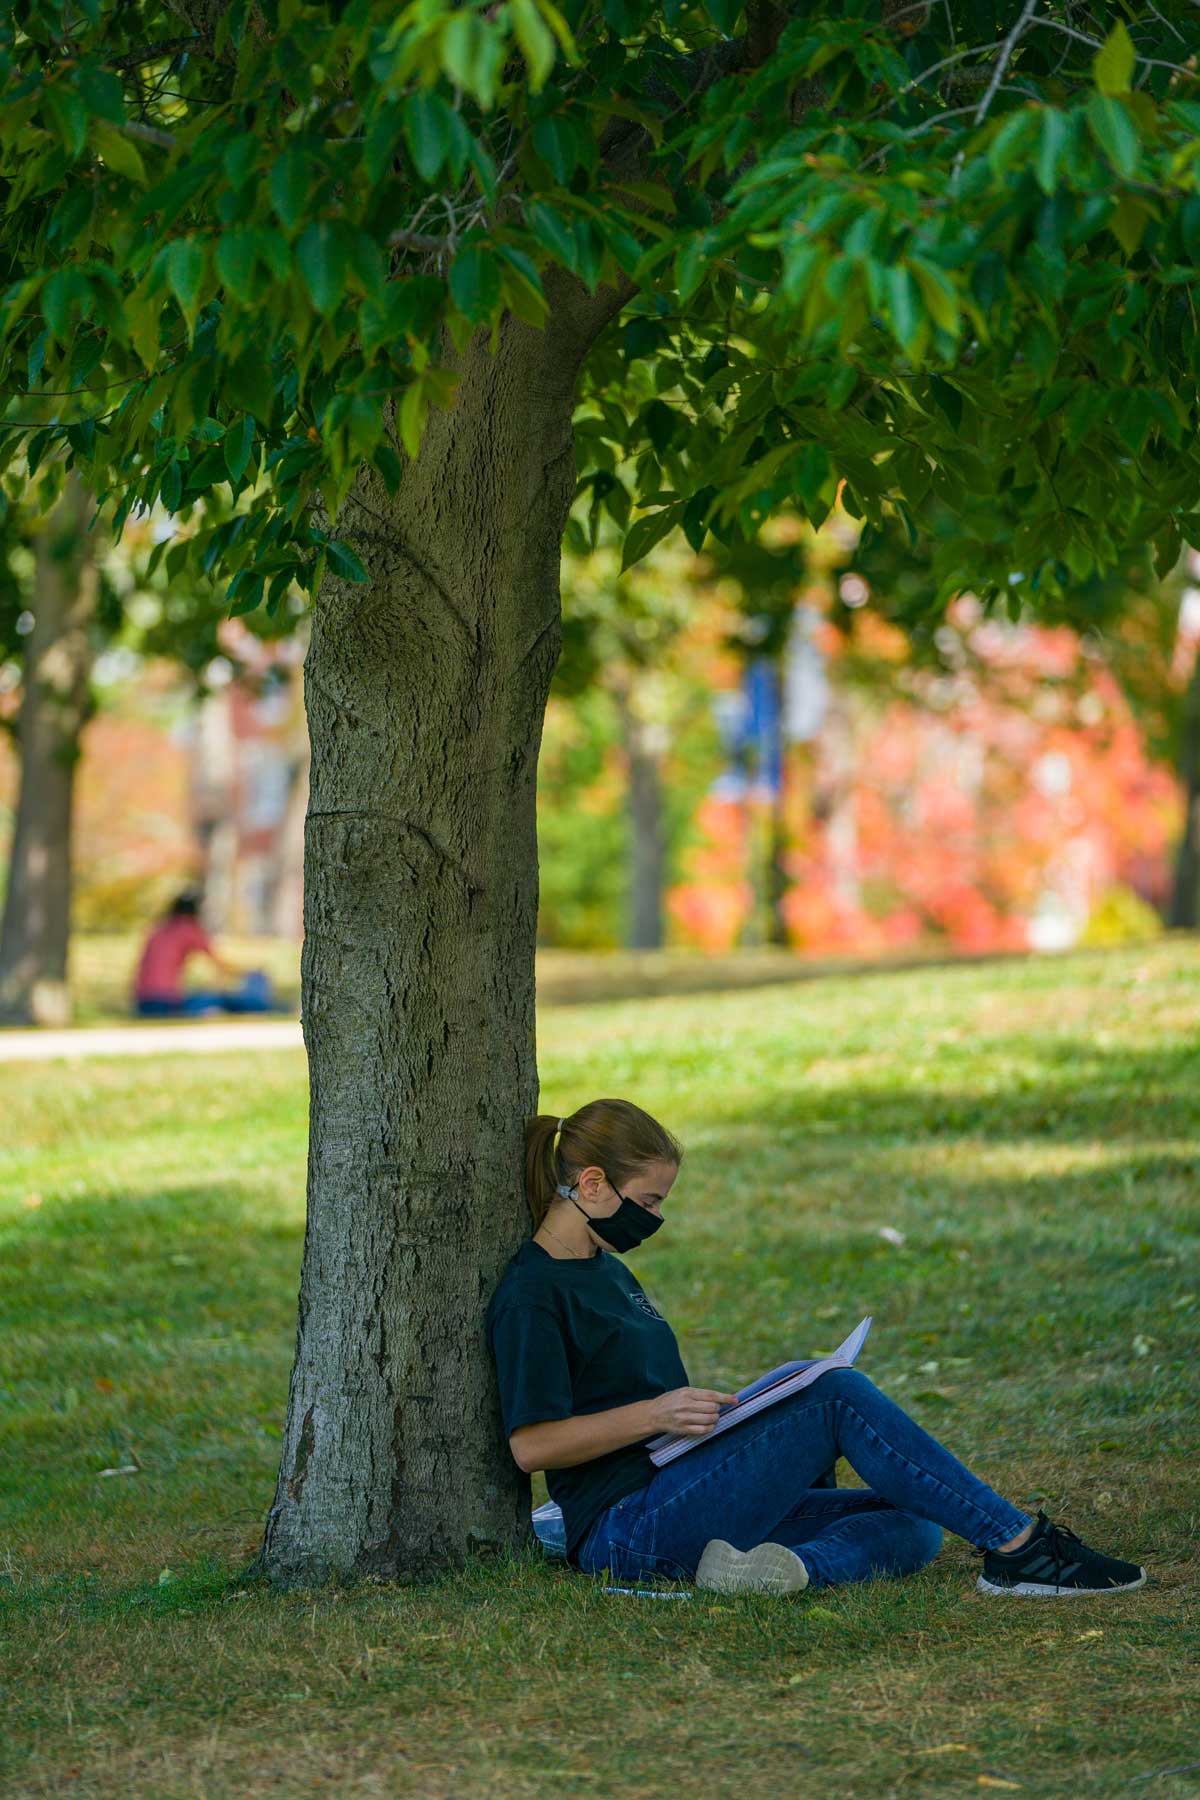 Reading notes on grass